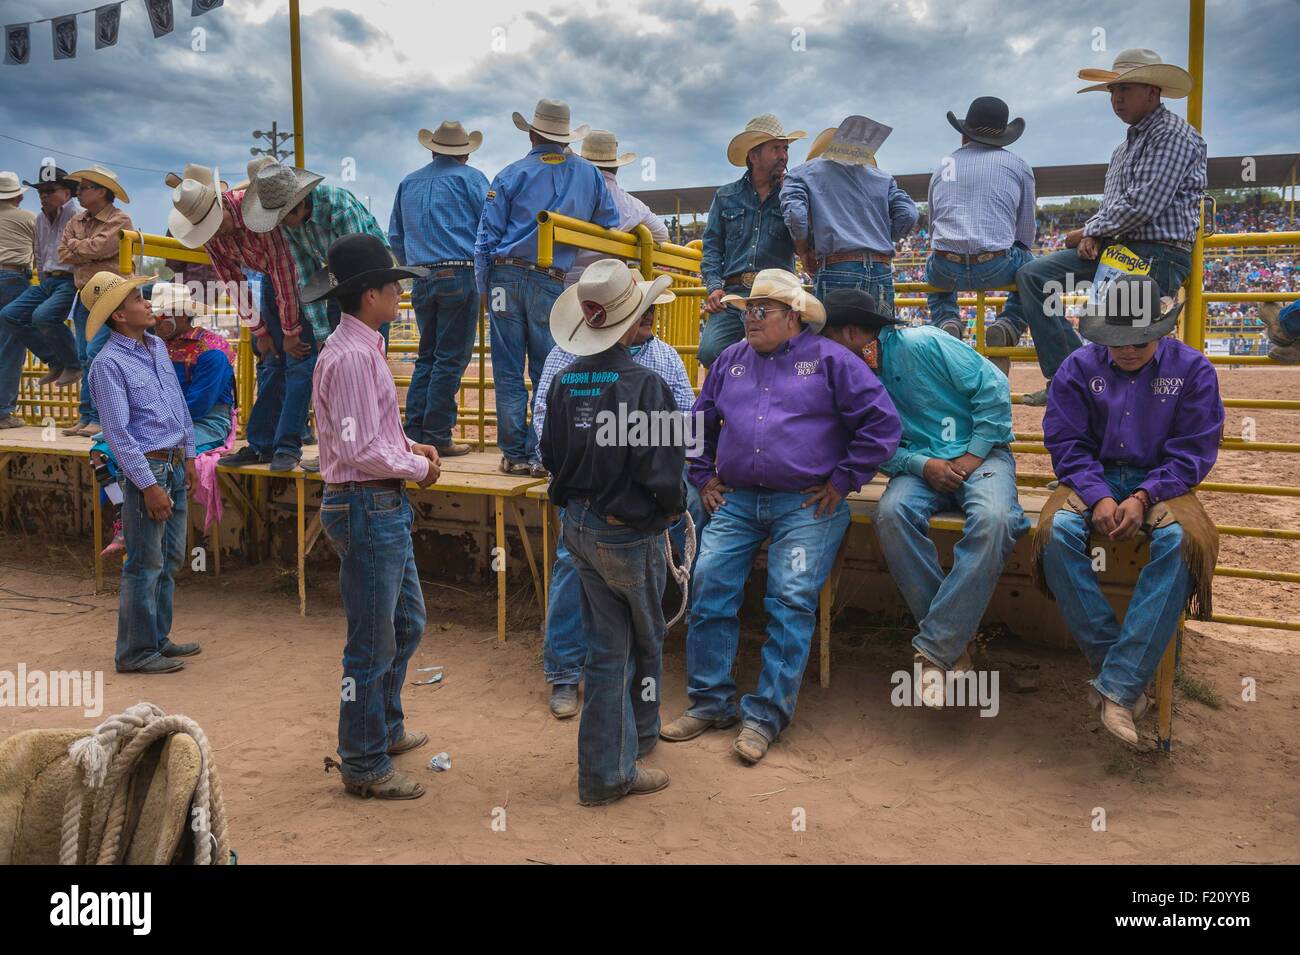 United States, Arizona, Window Rock, Festival Navajo Nation juste, rodeo Banque D'Images